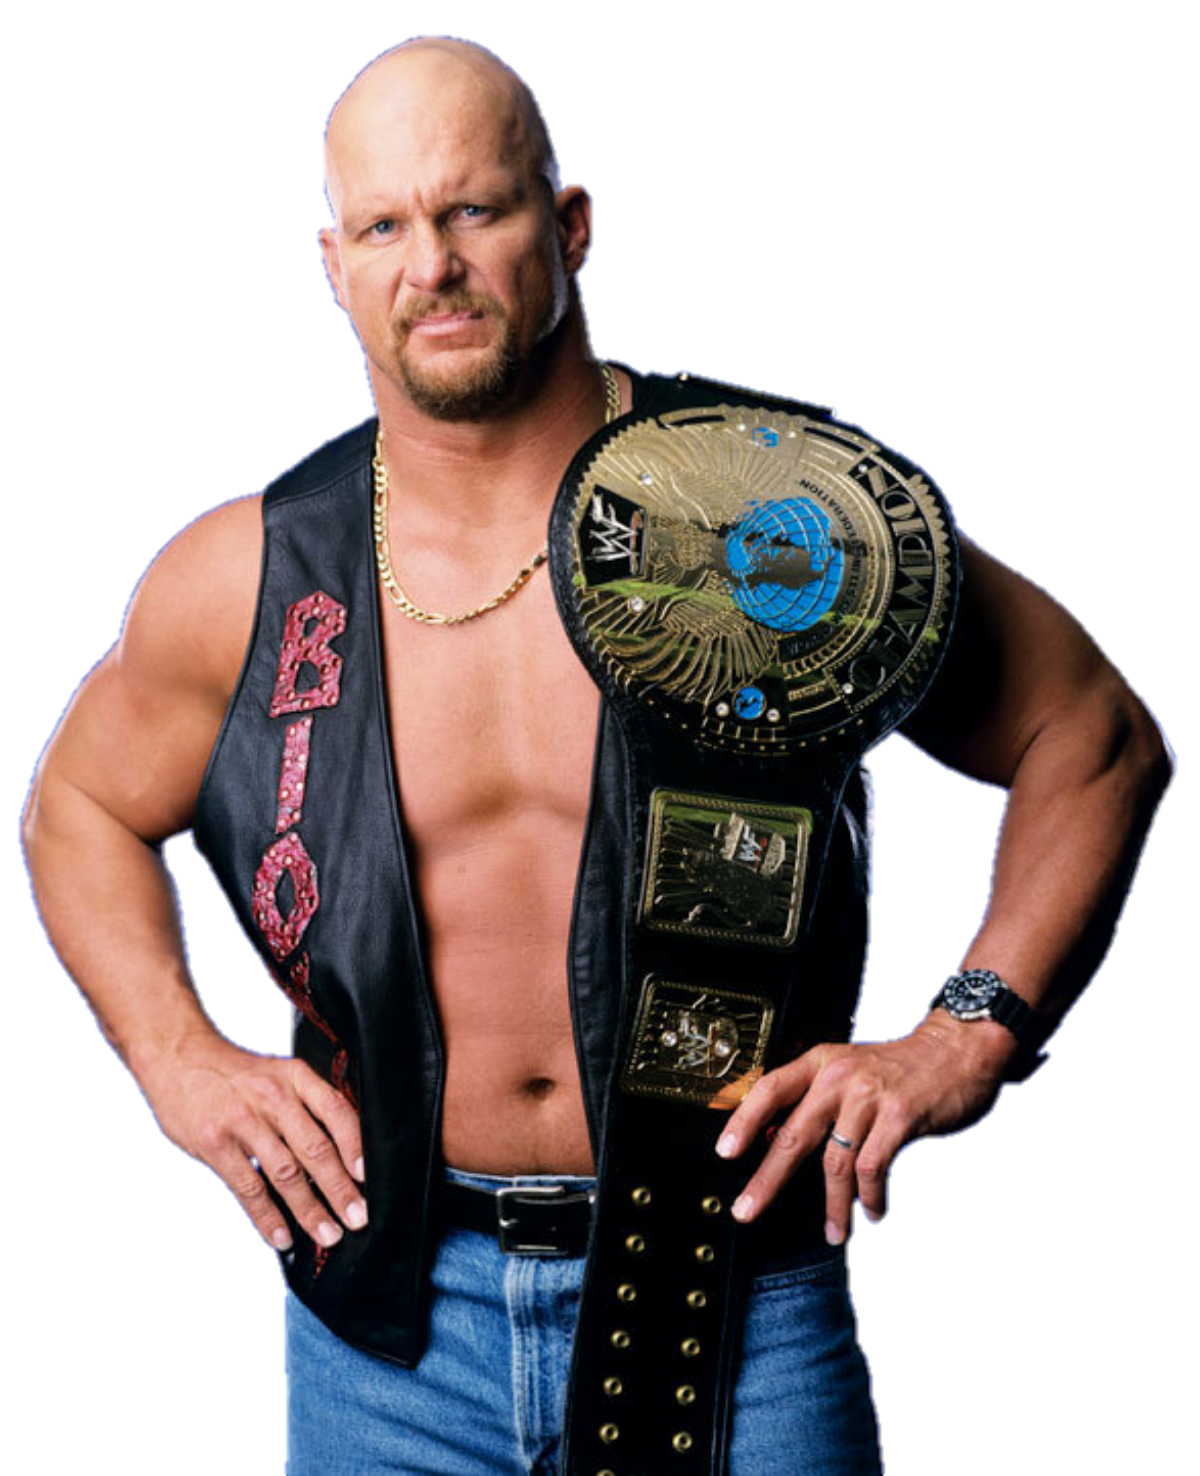 Stone Cold Steve Austin Wwe Image Abyss